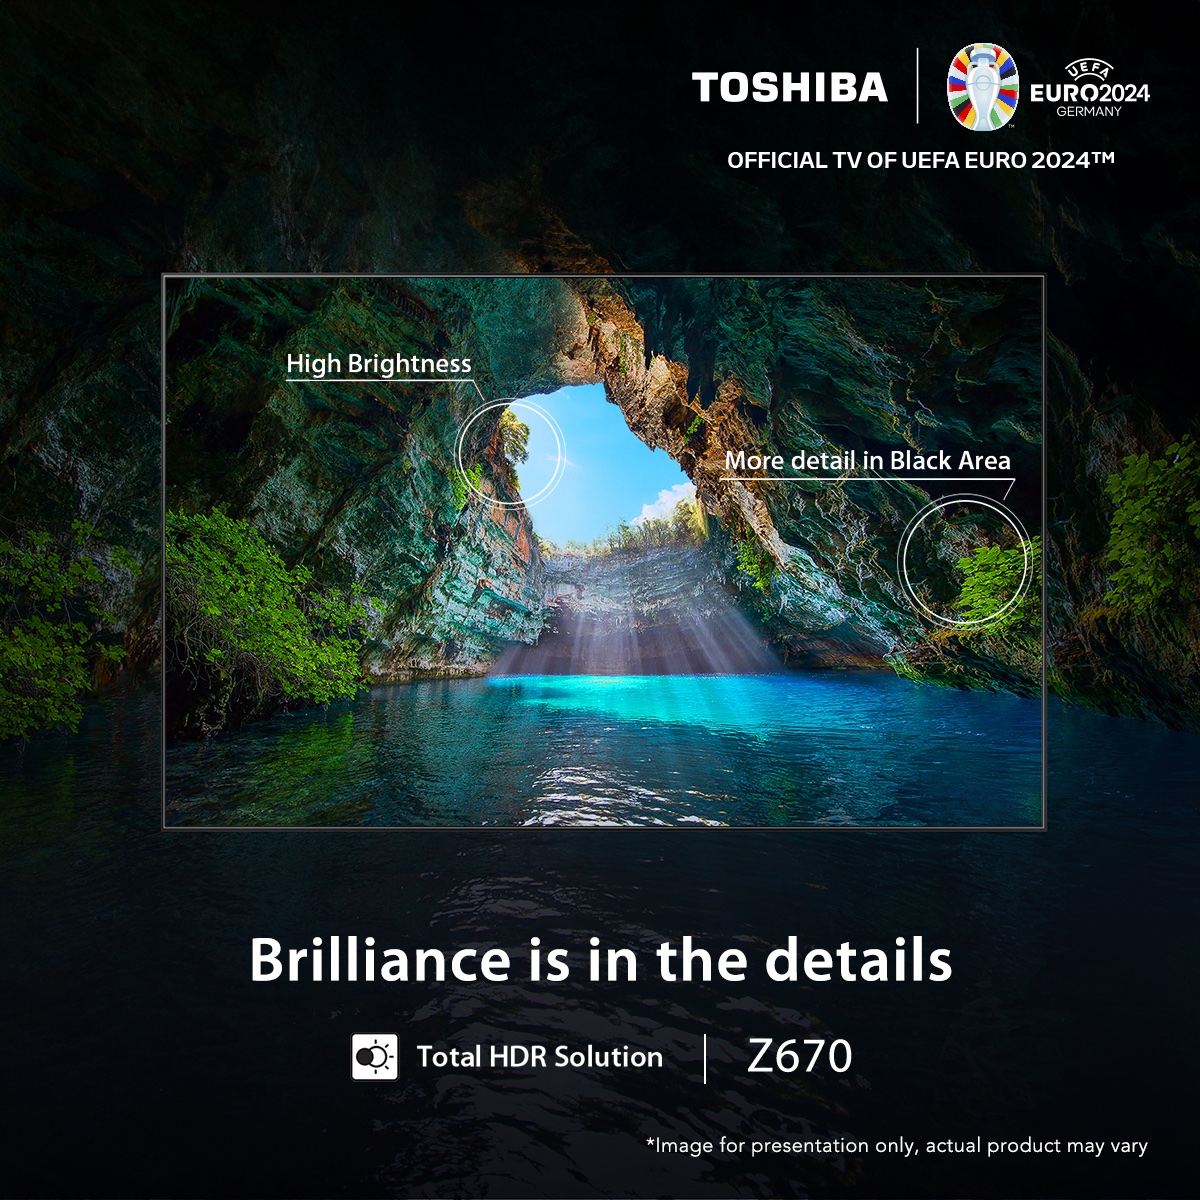 In details we trust. #ToshibaTV Z670 is fluent in Dolby Vision HDR, HDR10+, HDR10, and HLG formats - decoded and translated flawlessly so you never miss a pixel of brilliance. 'Like' if you're ready for your next pixel-perfect adventure. #BeRealCraftsmanship